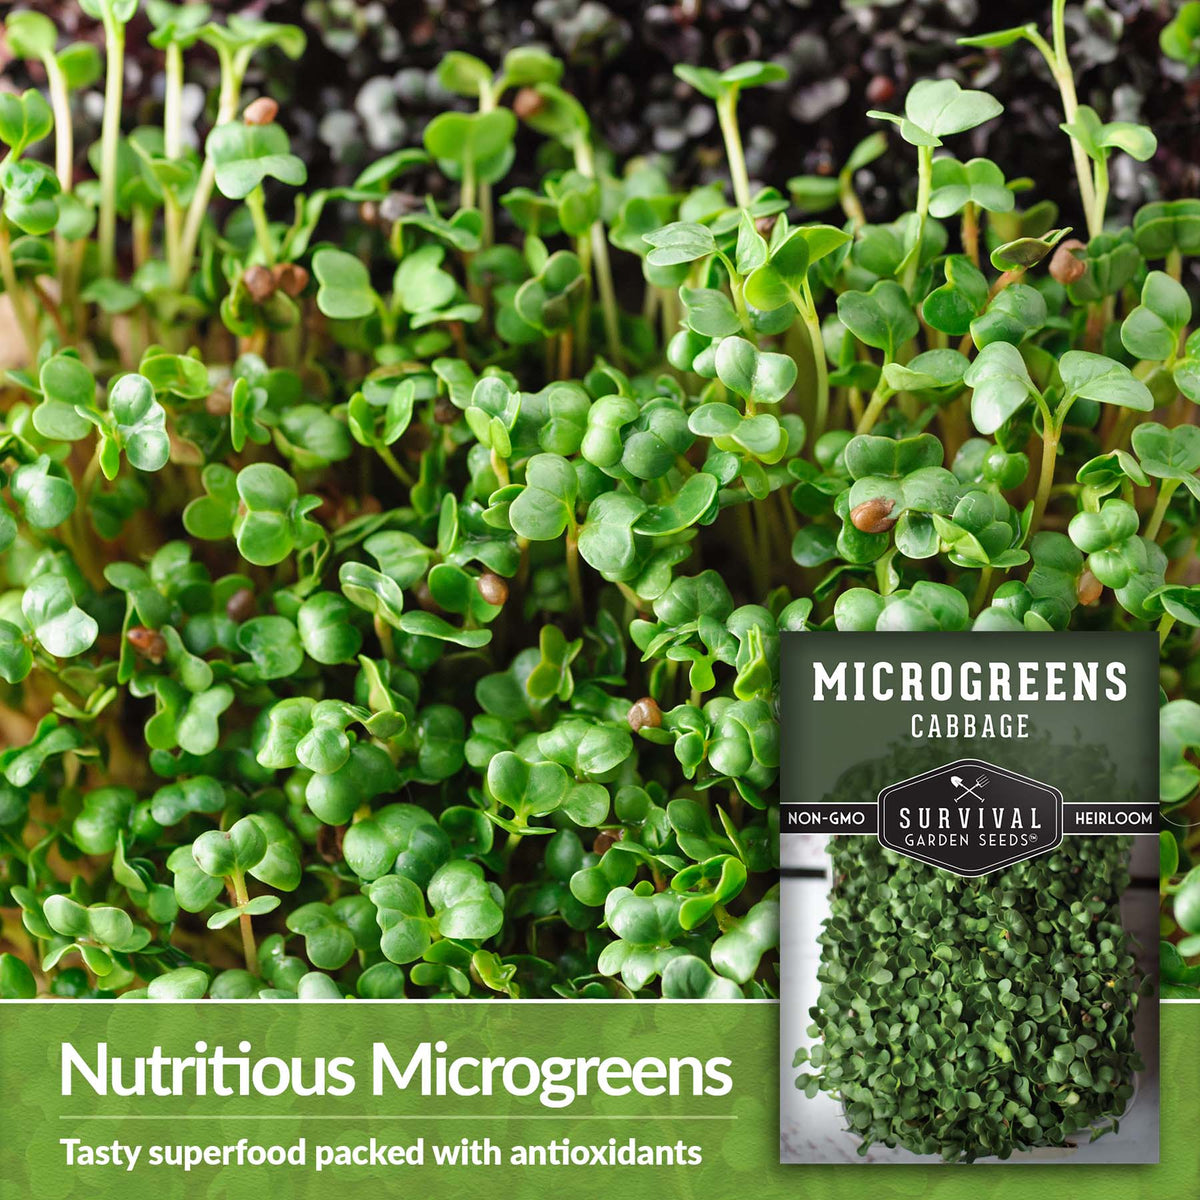 Microgreens  are a tasty superfood packed with anti-oxidants